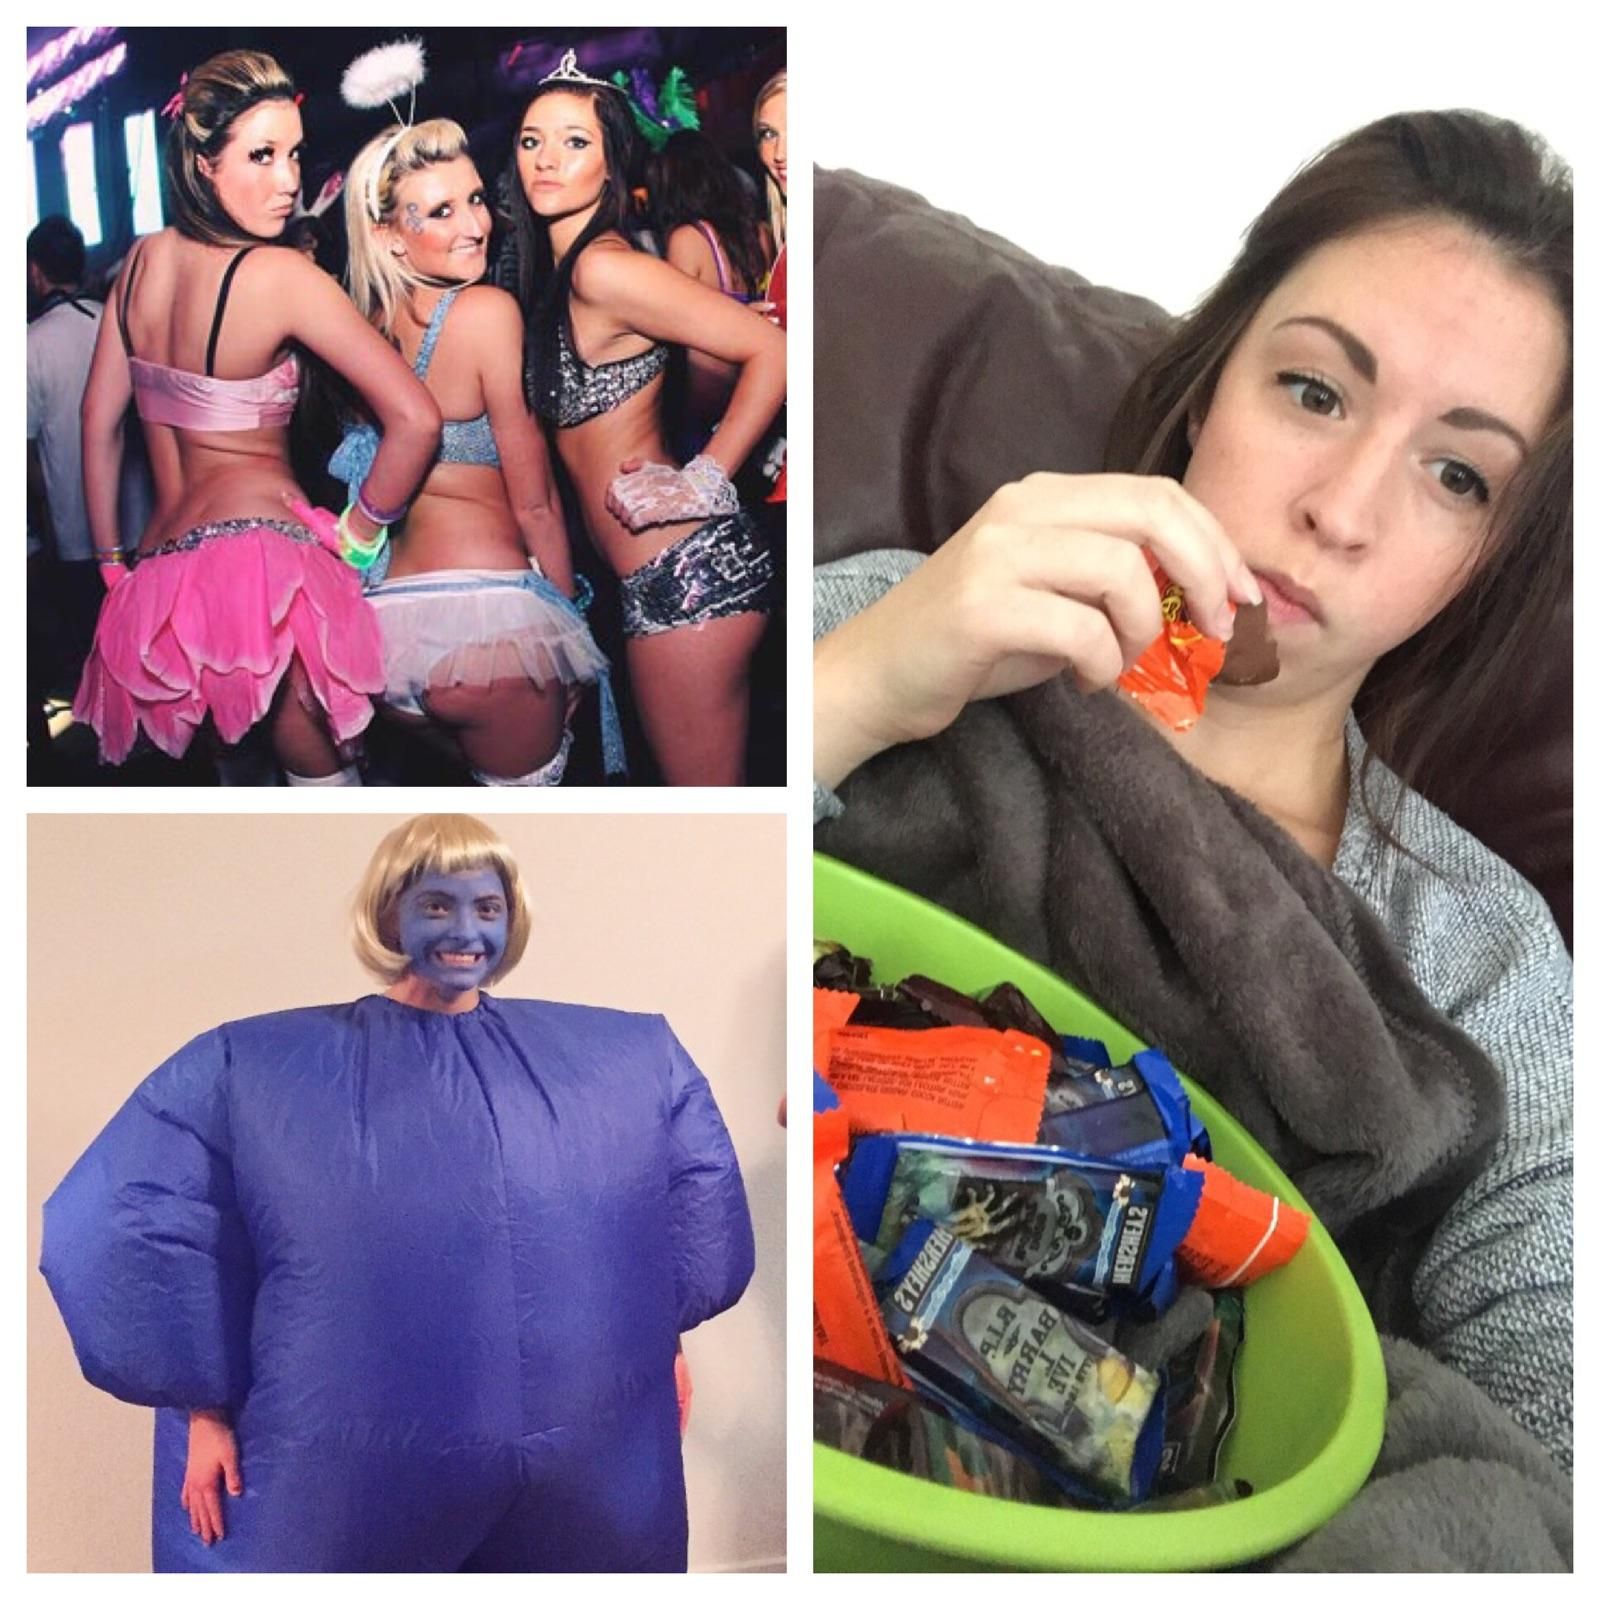 There are 3 types of girls on Halloween